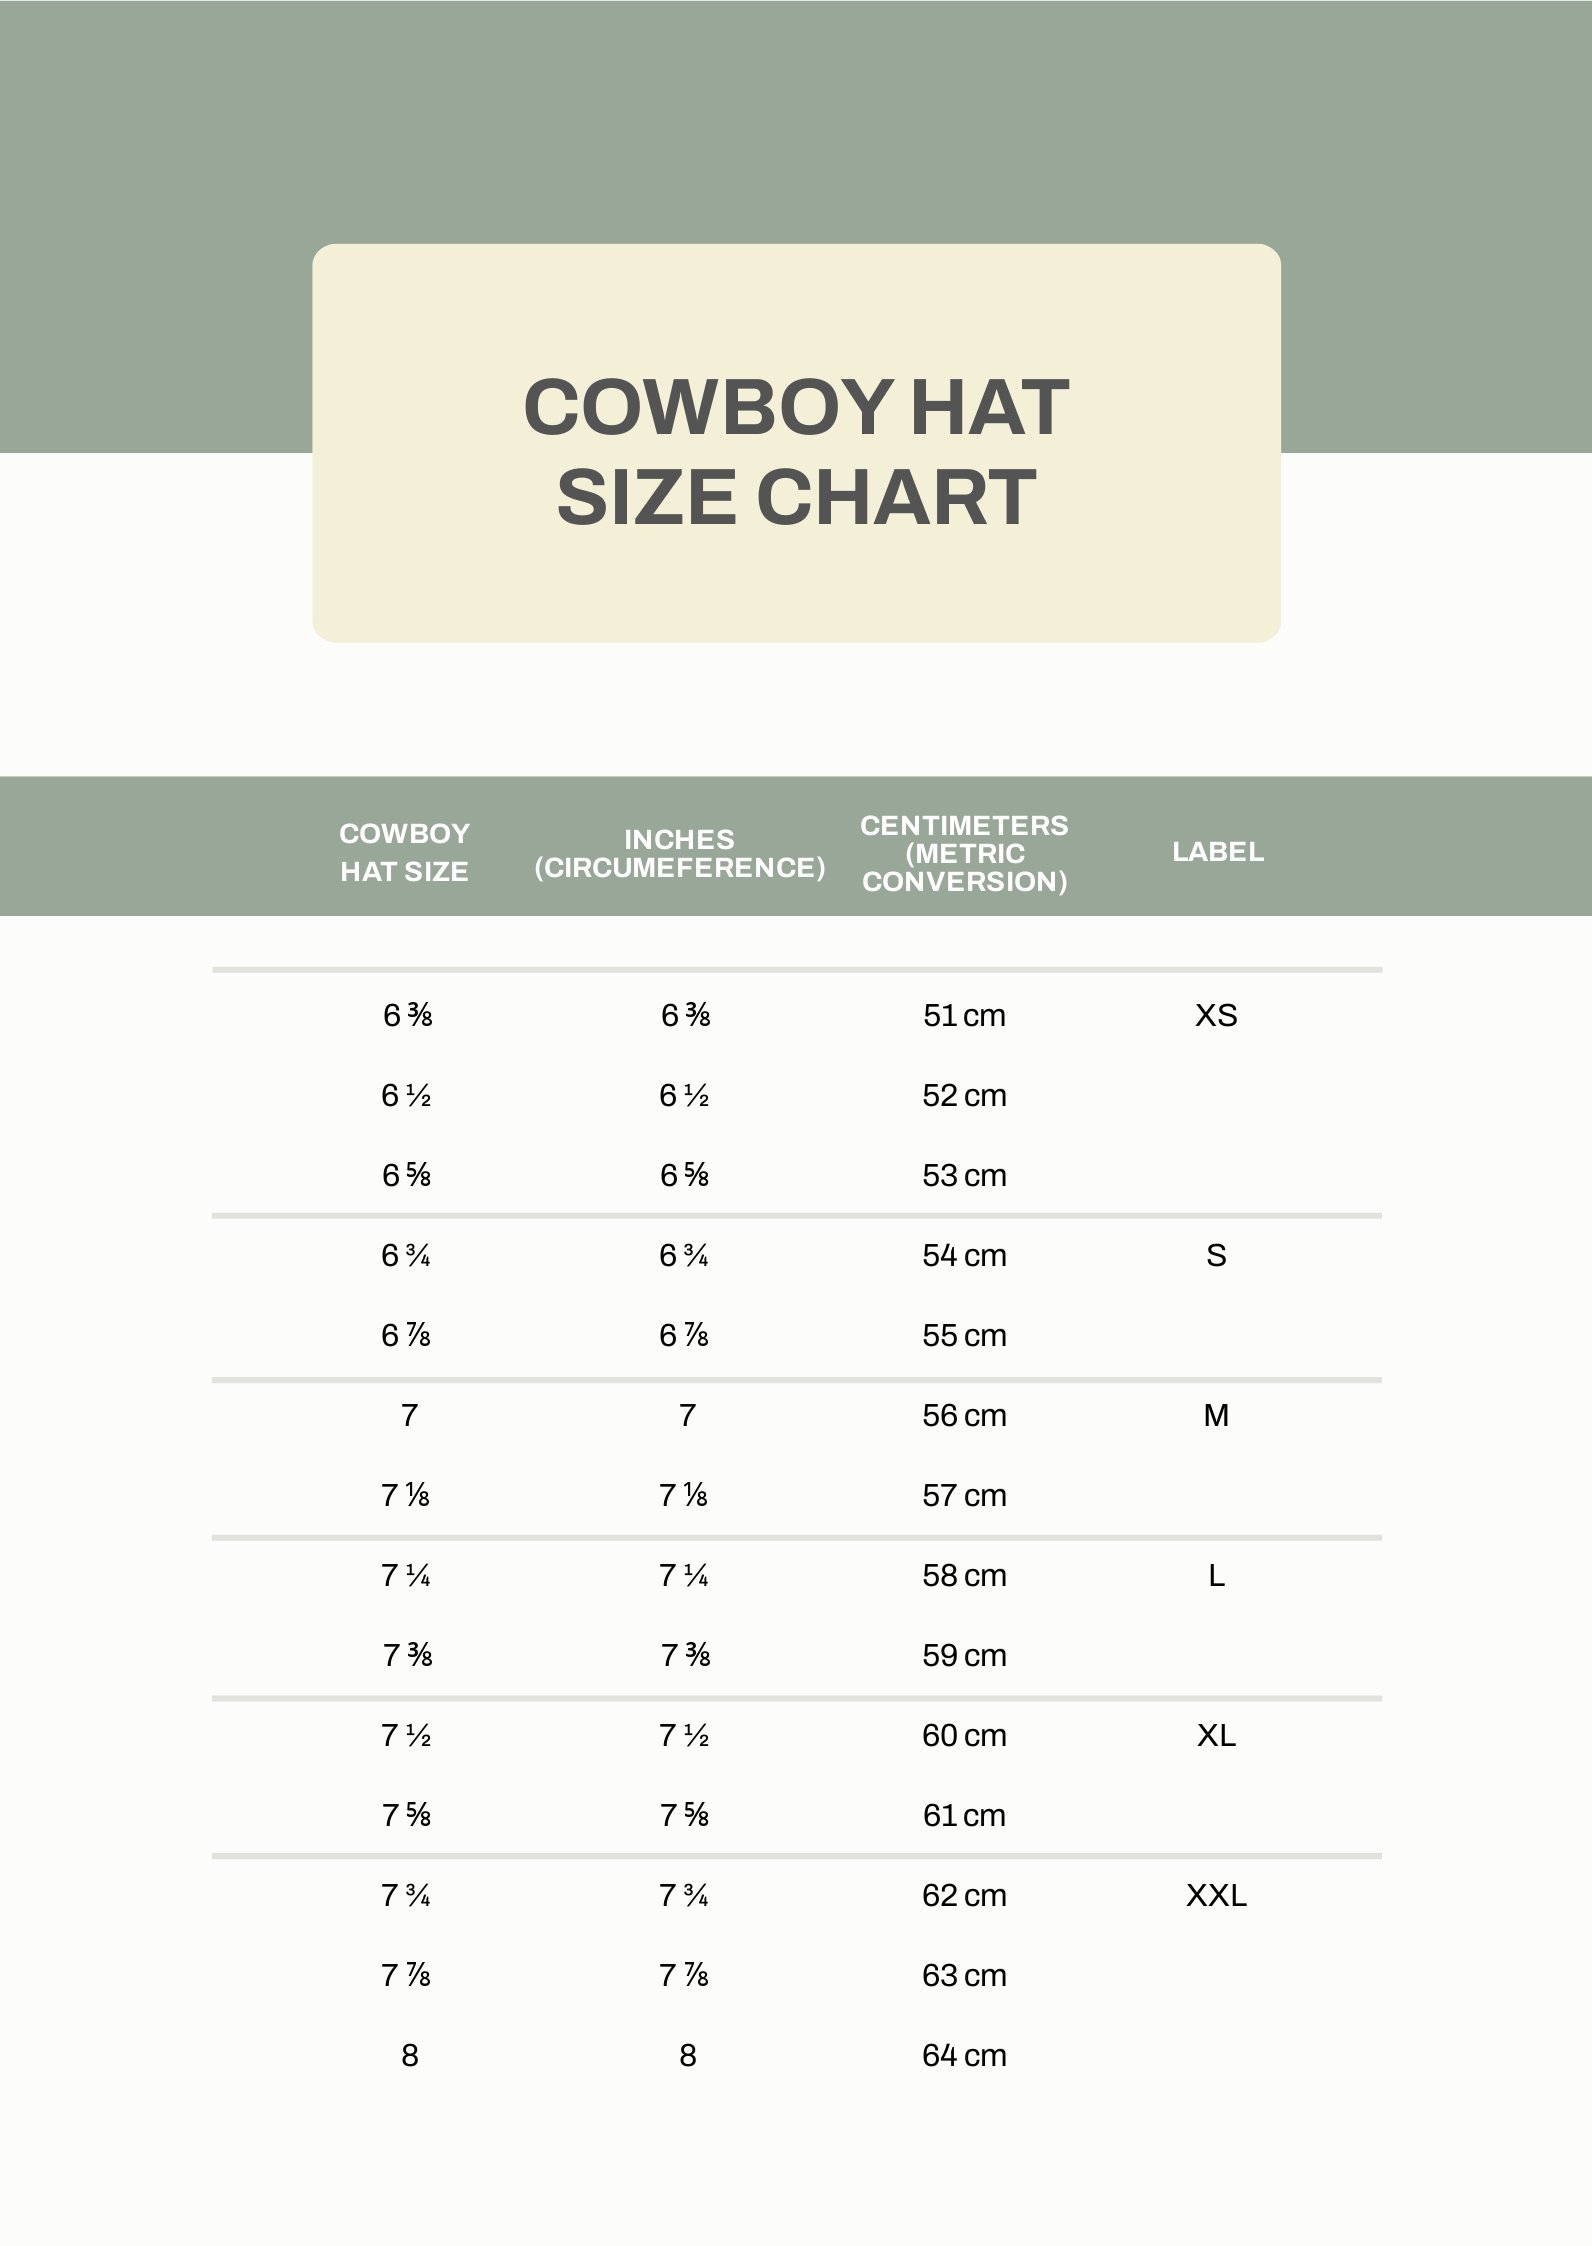 FREE Cowboy Template - Download in PDF, Illustrator, Photoshop, EPS ...